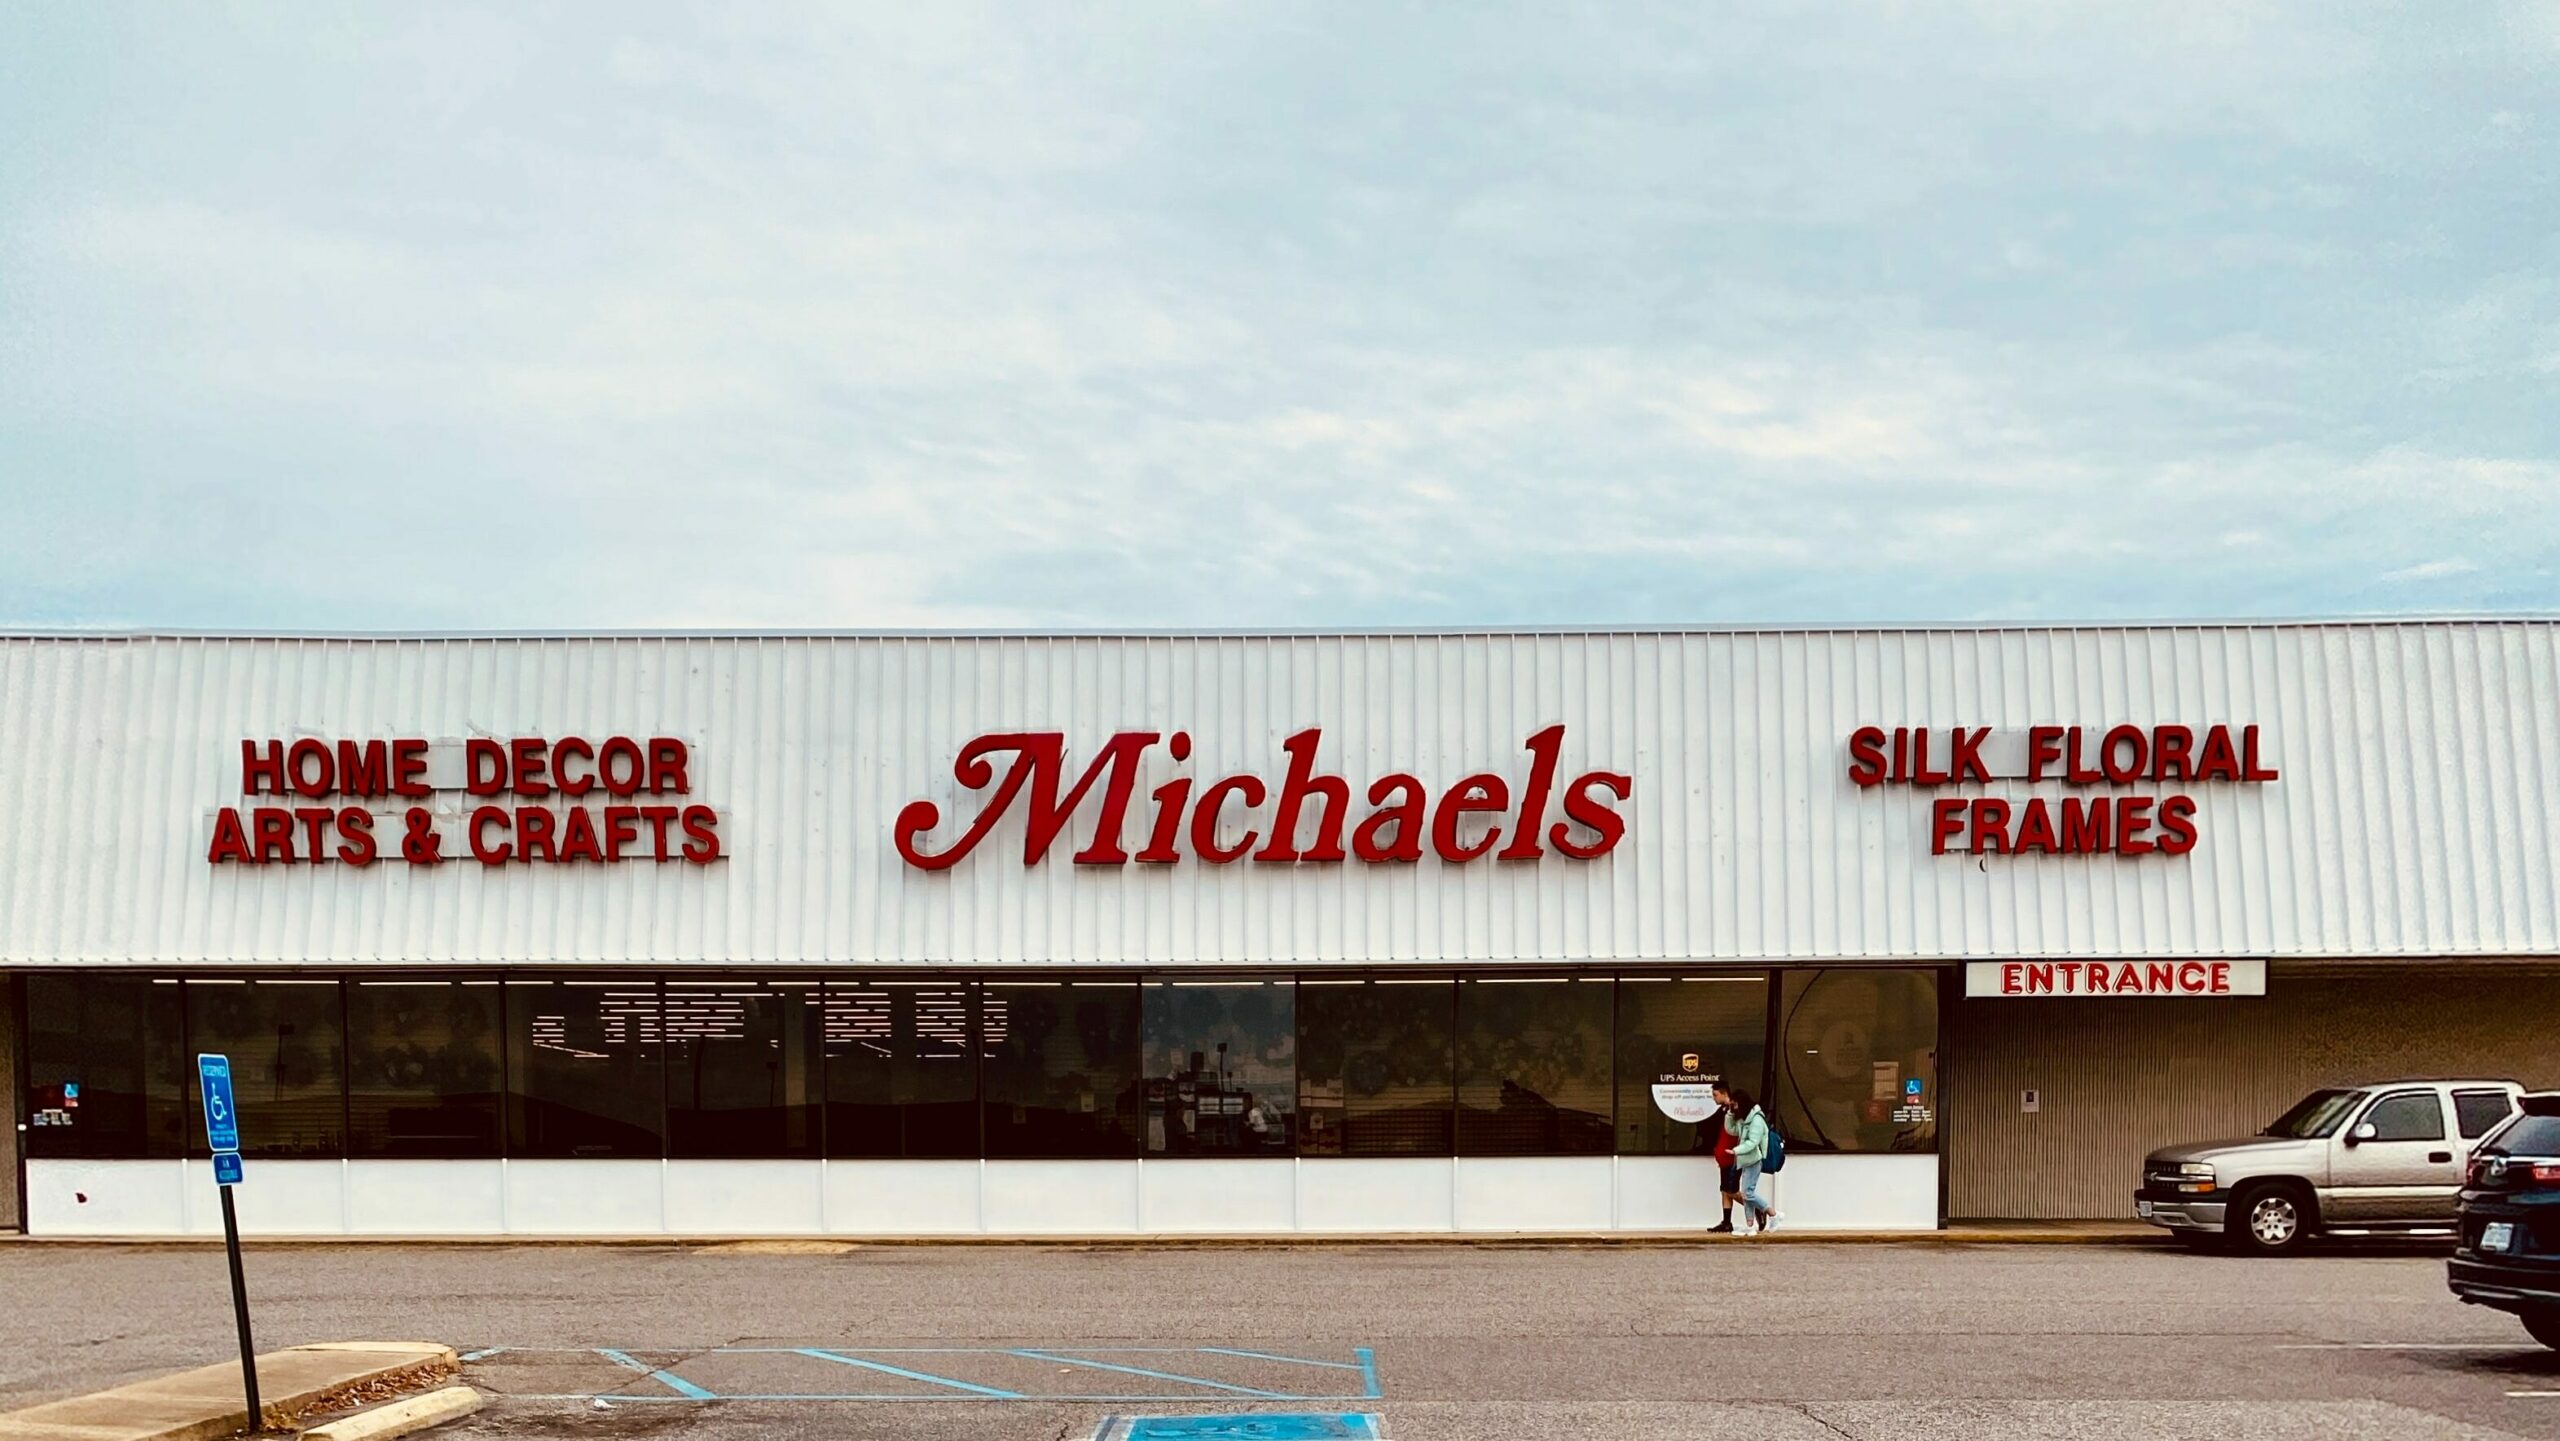 What Time Does Michaels Close Open?